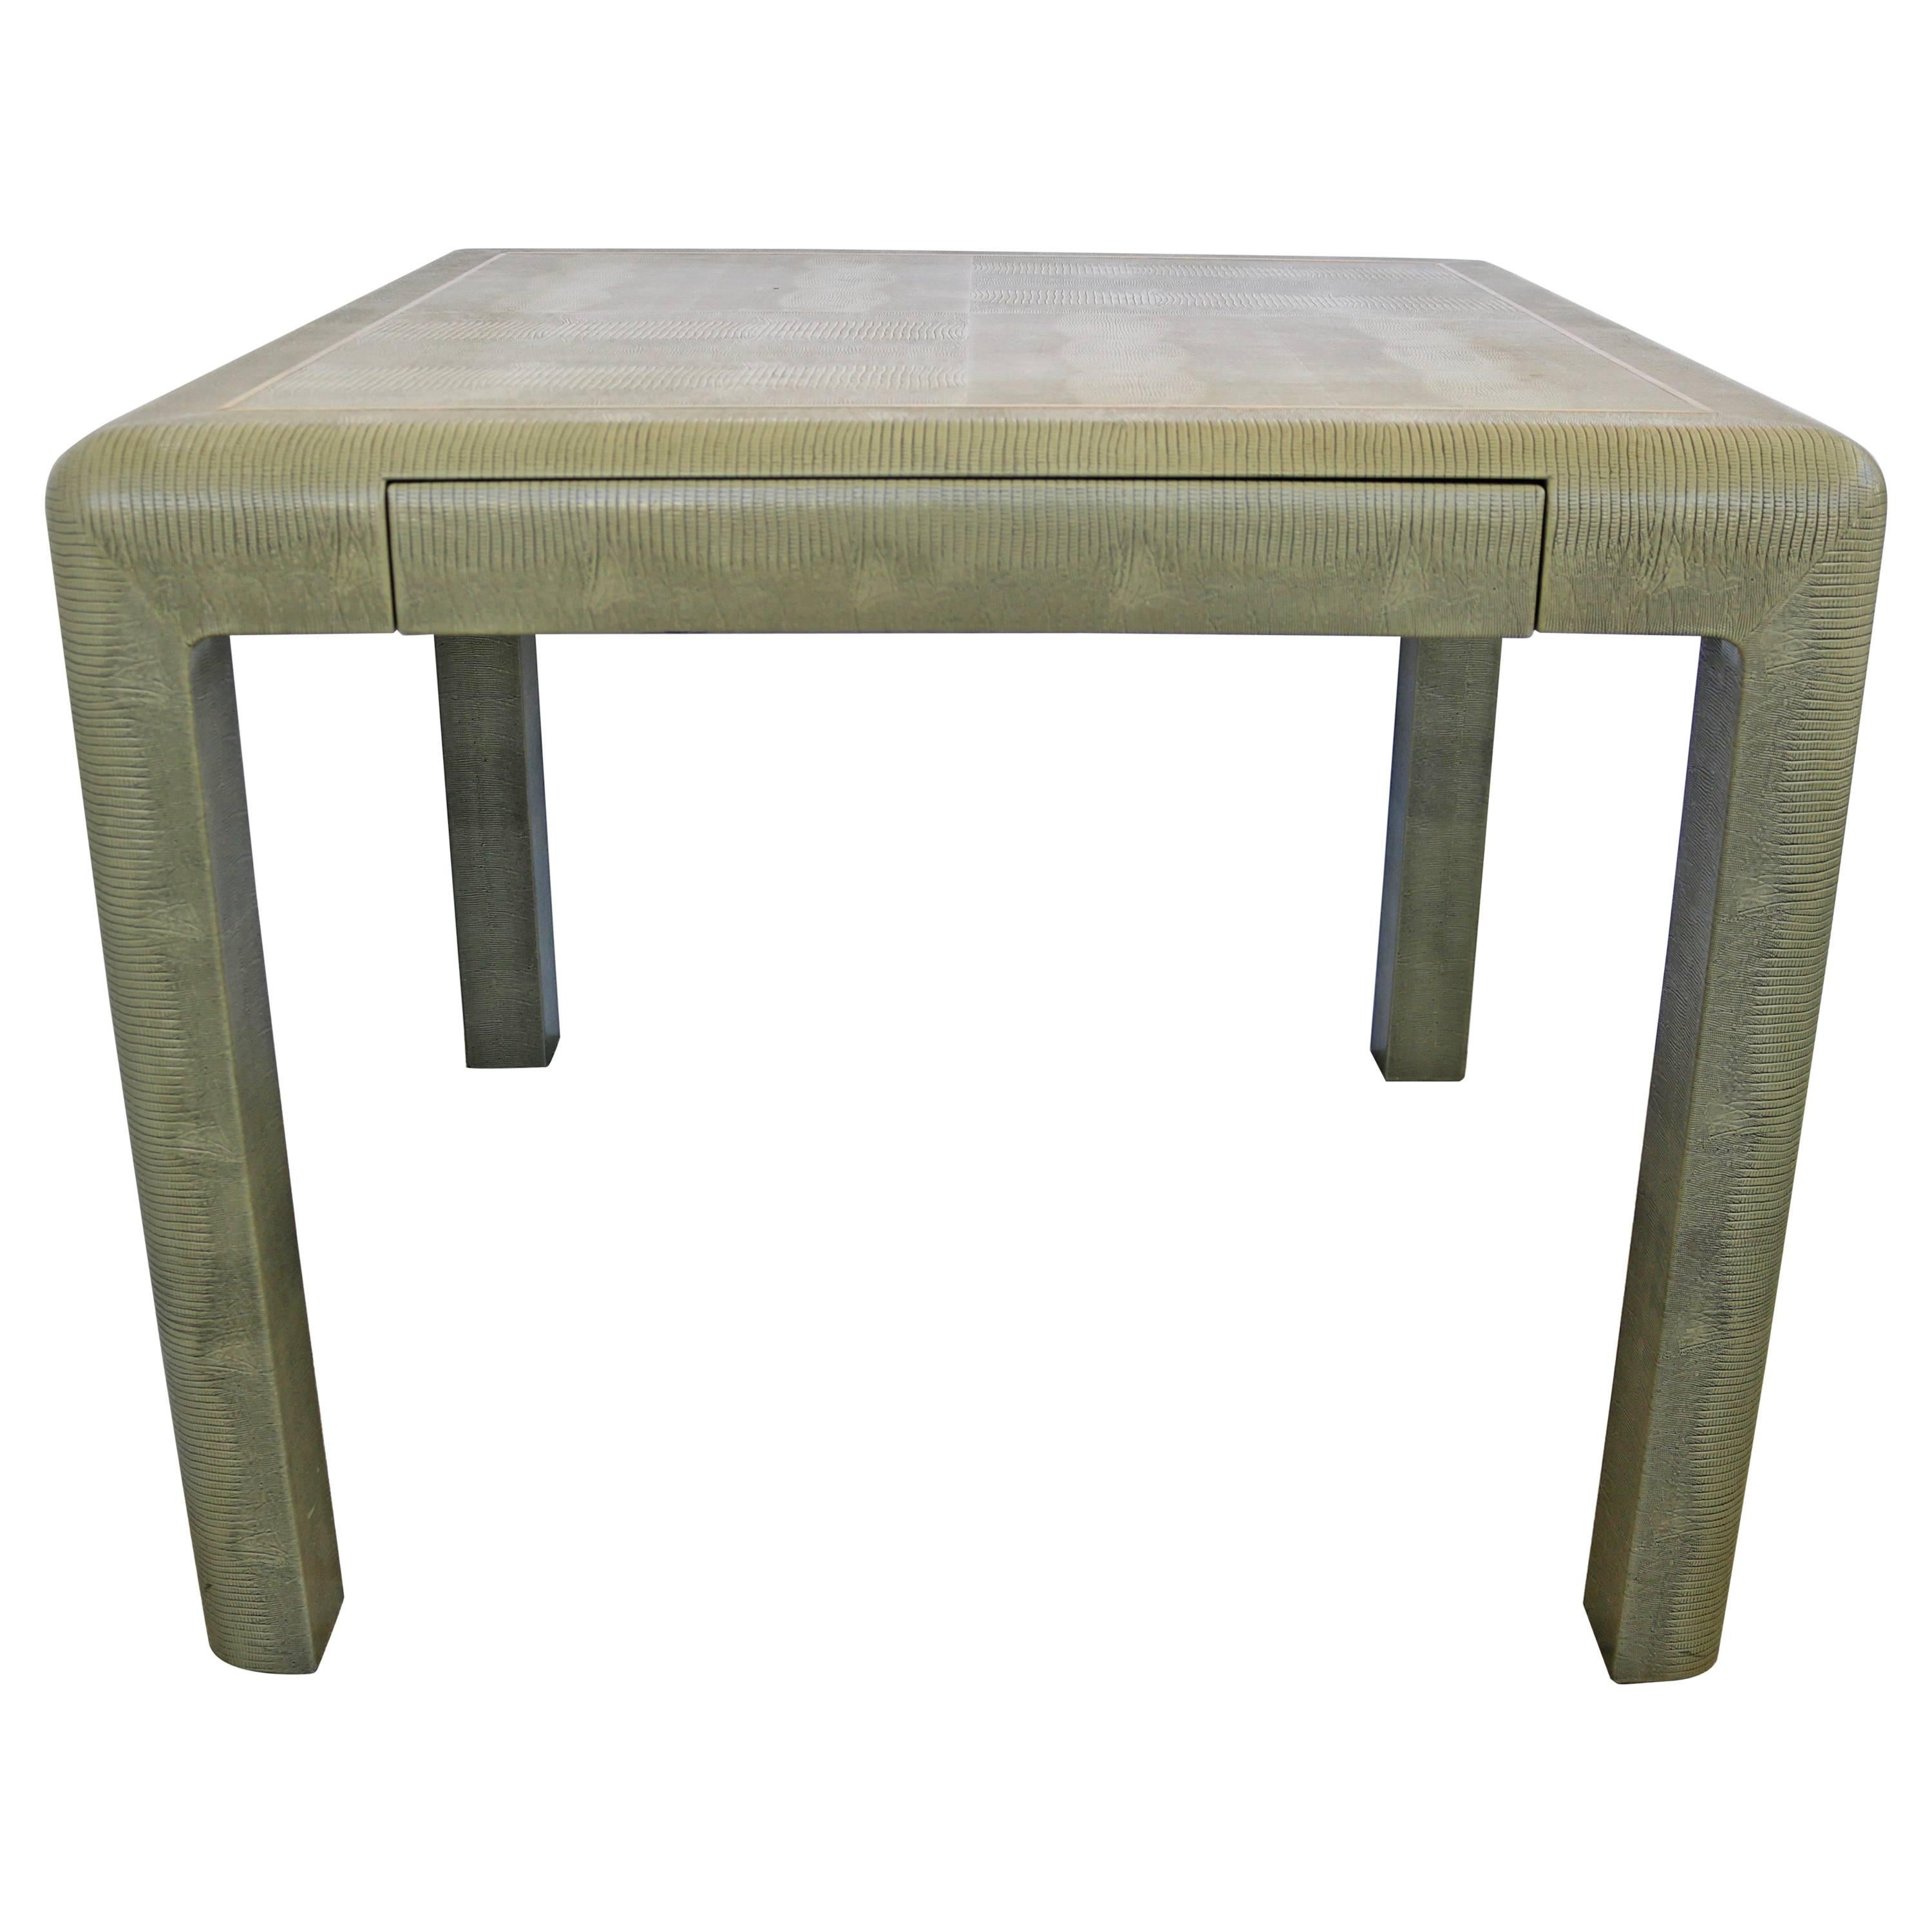 Karl Springer Game Table in Green Faux Lizard with Brass Trim, circa 1986